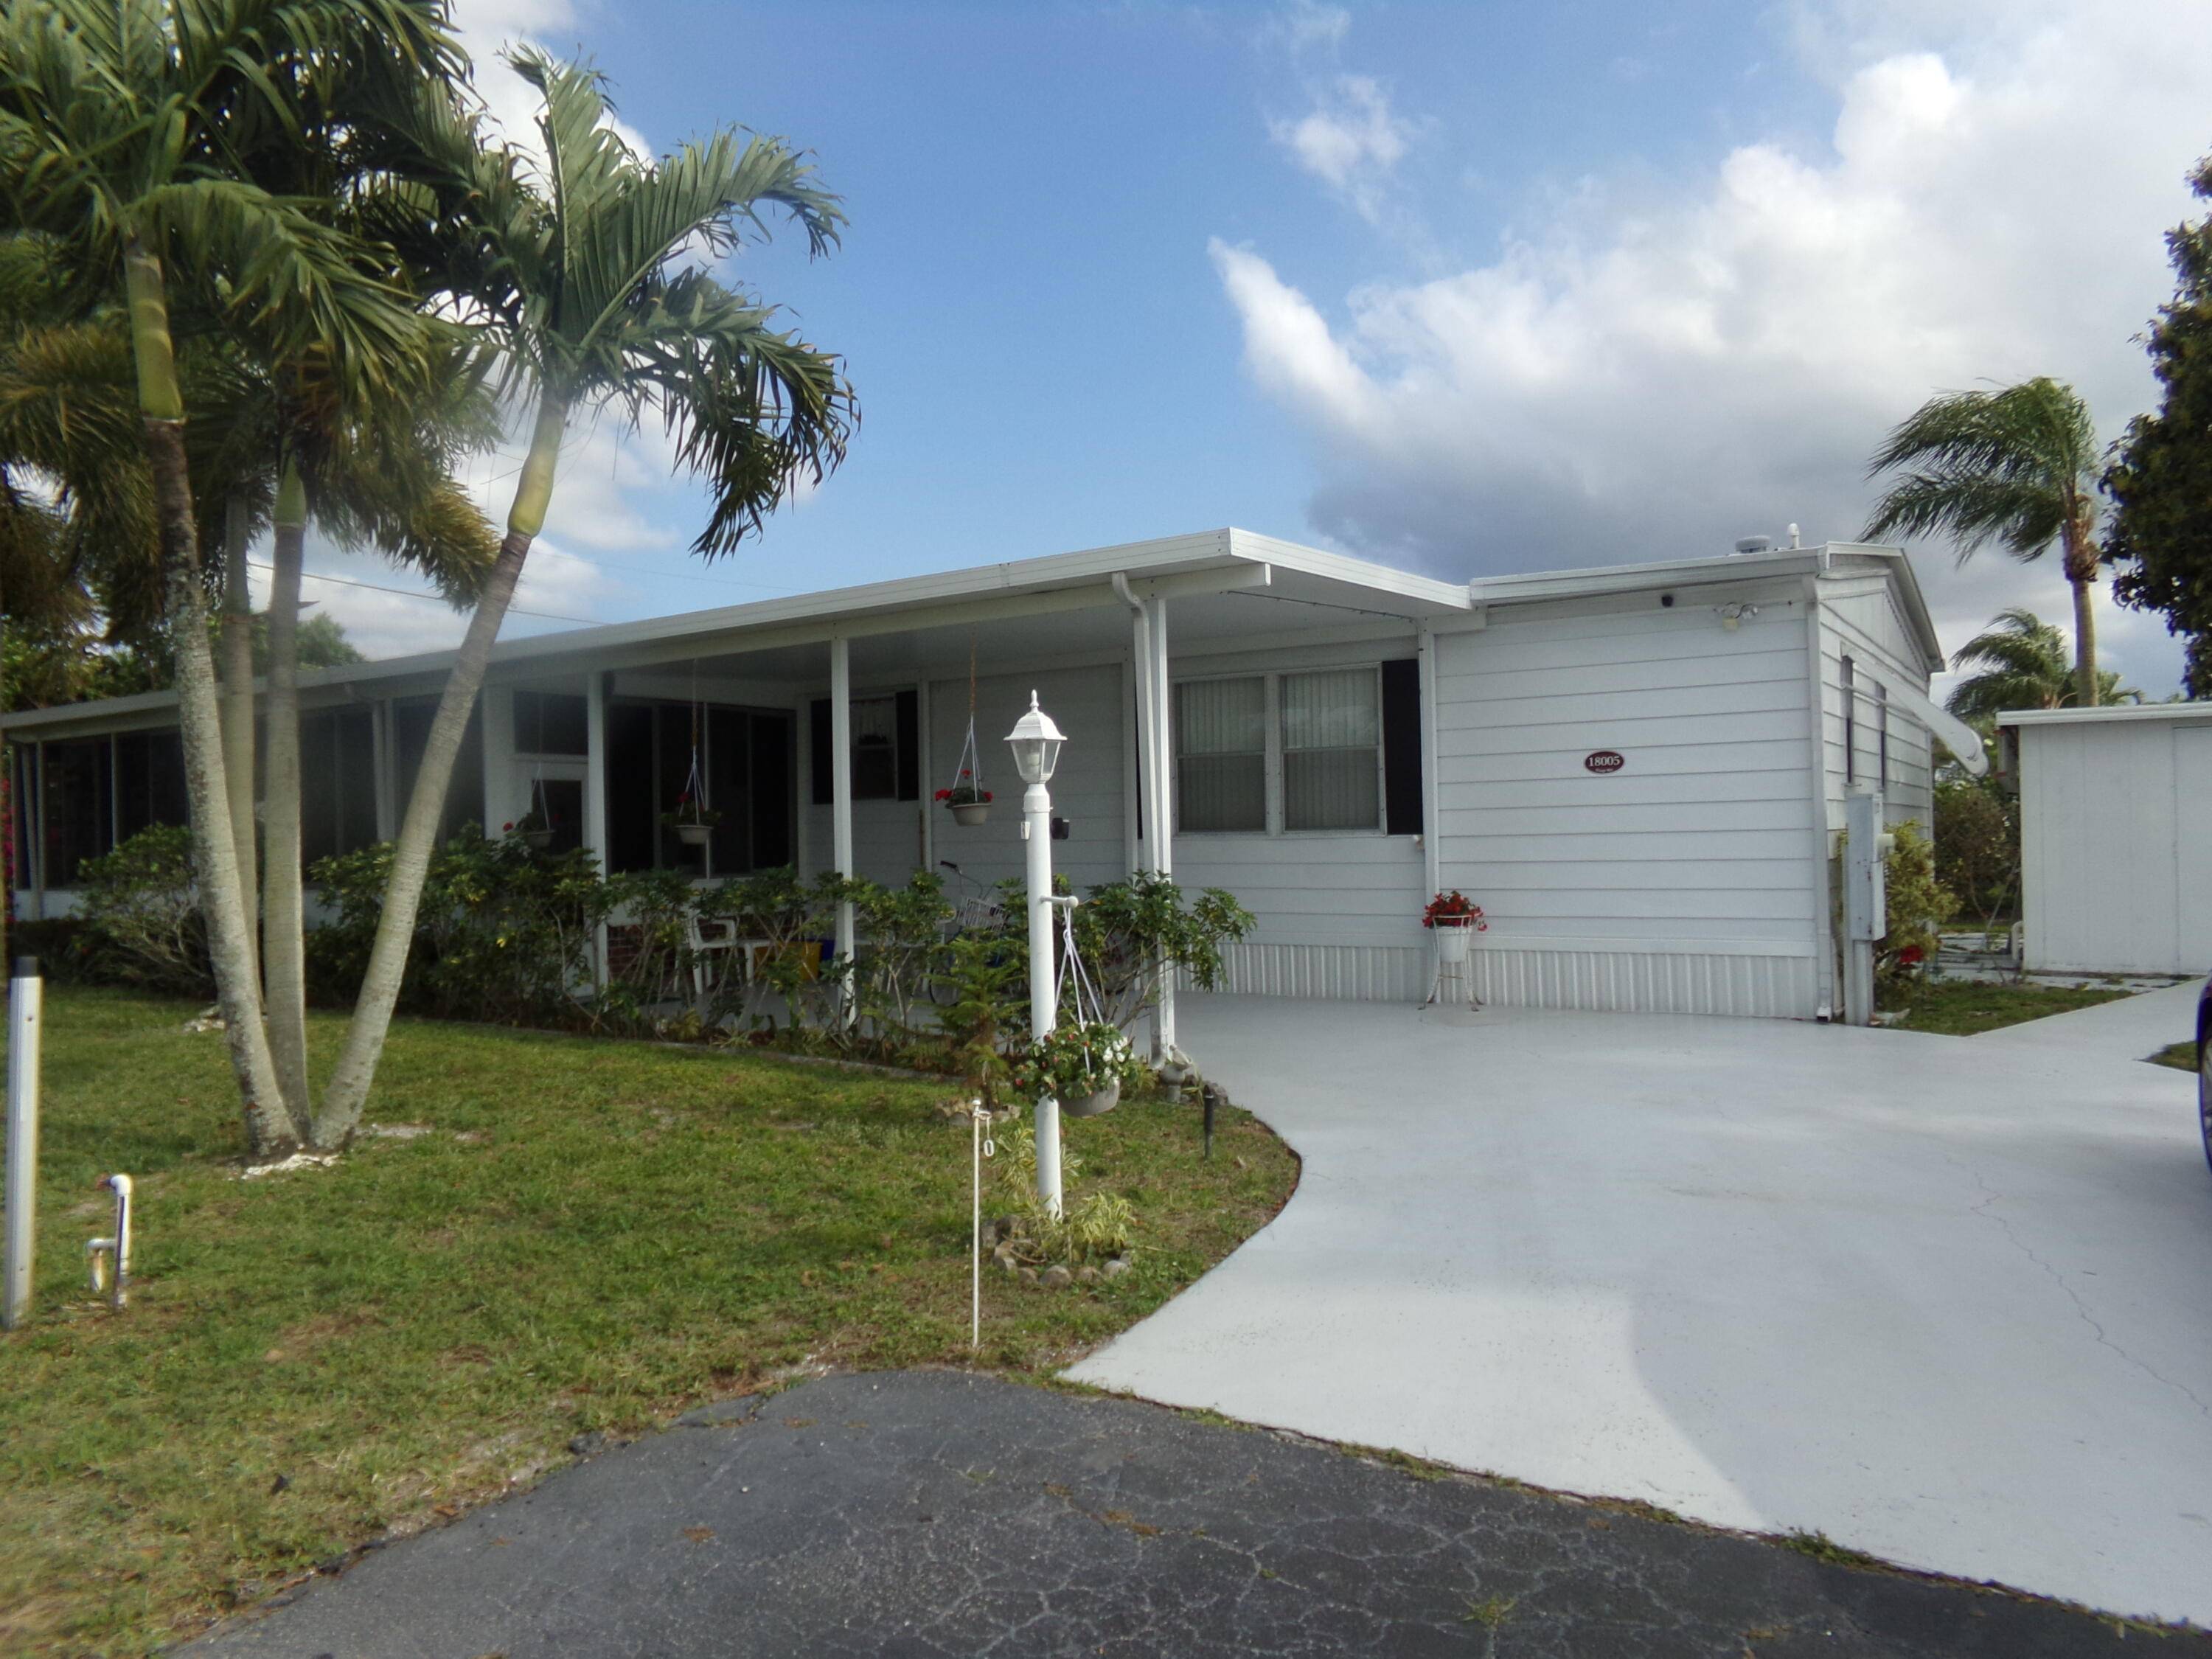 Very well maintained home with beautiful landscape located in the desirable Jamaica Bay community in Boynton Beach.